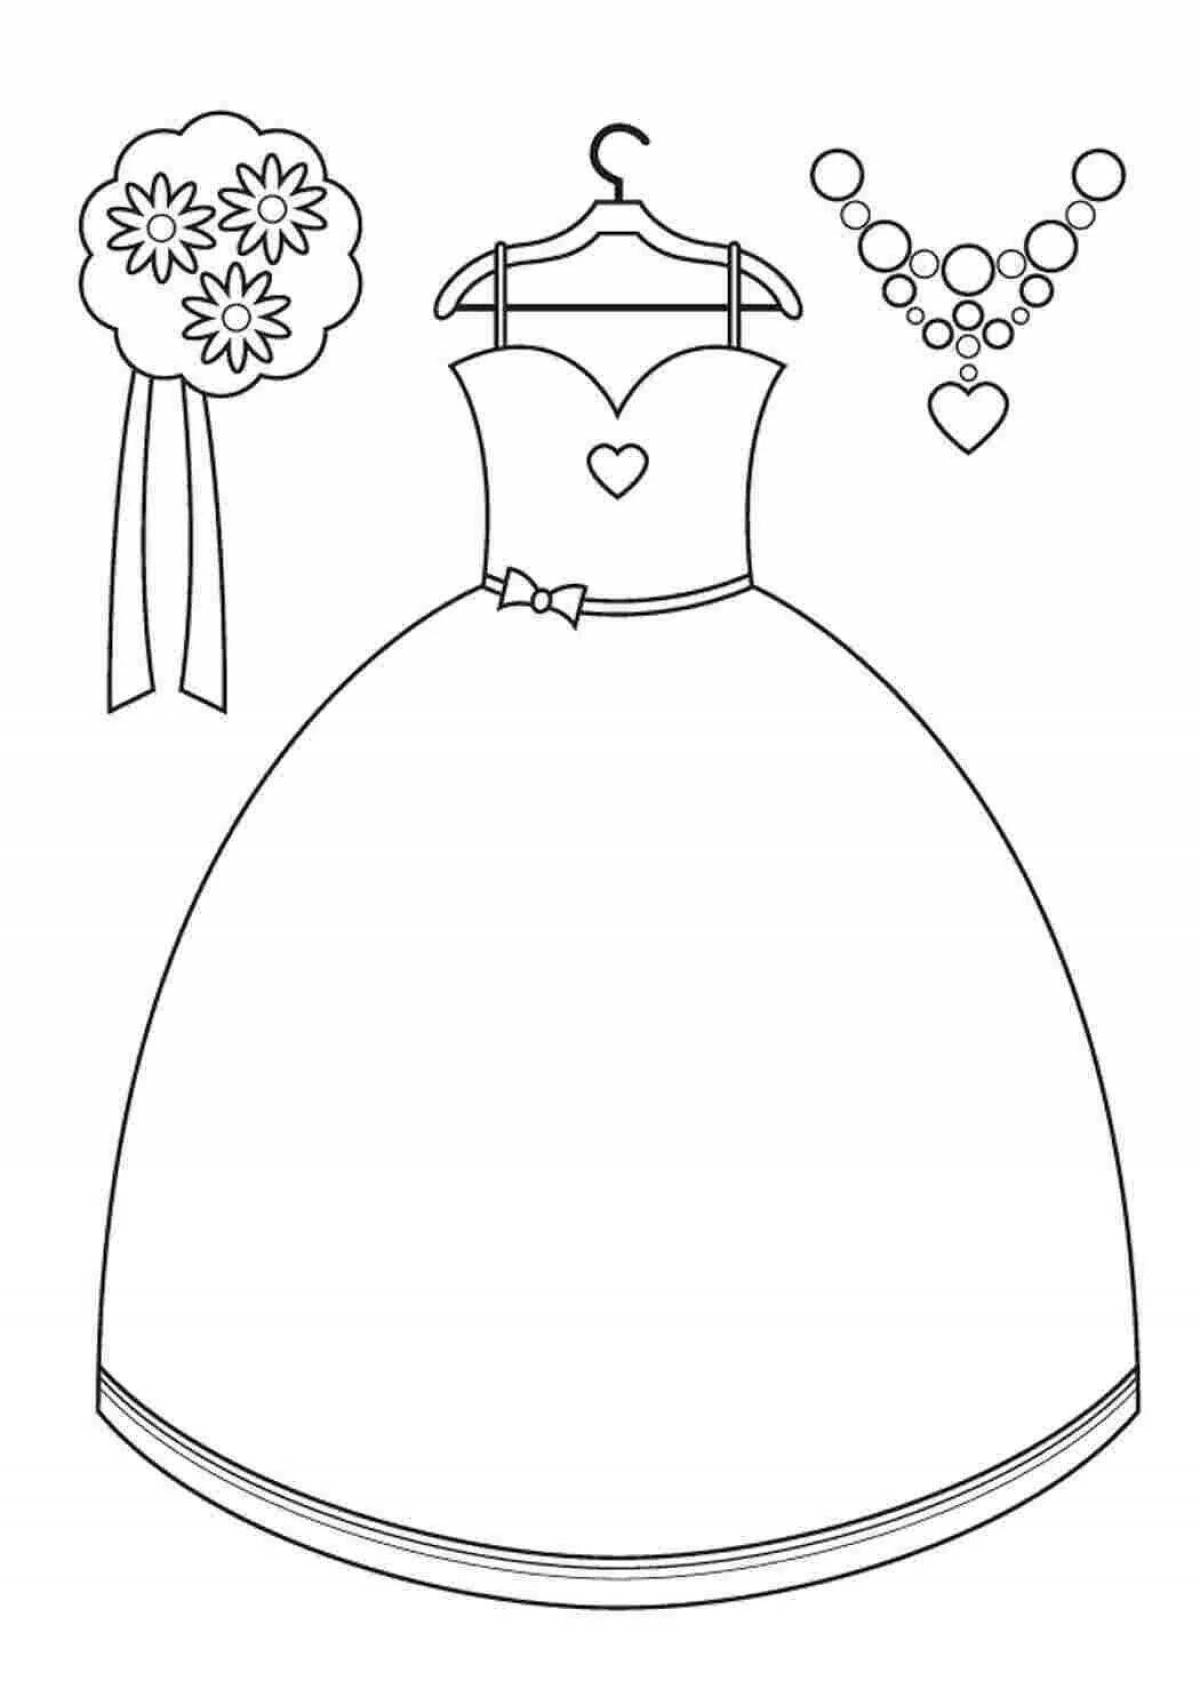 Coloring page stylish dress for children 4-5 years old